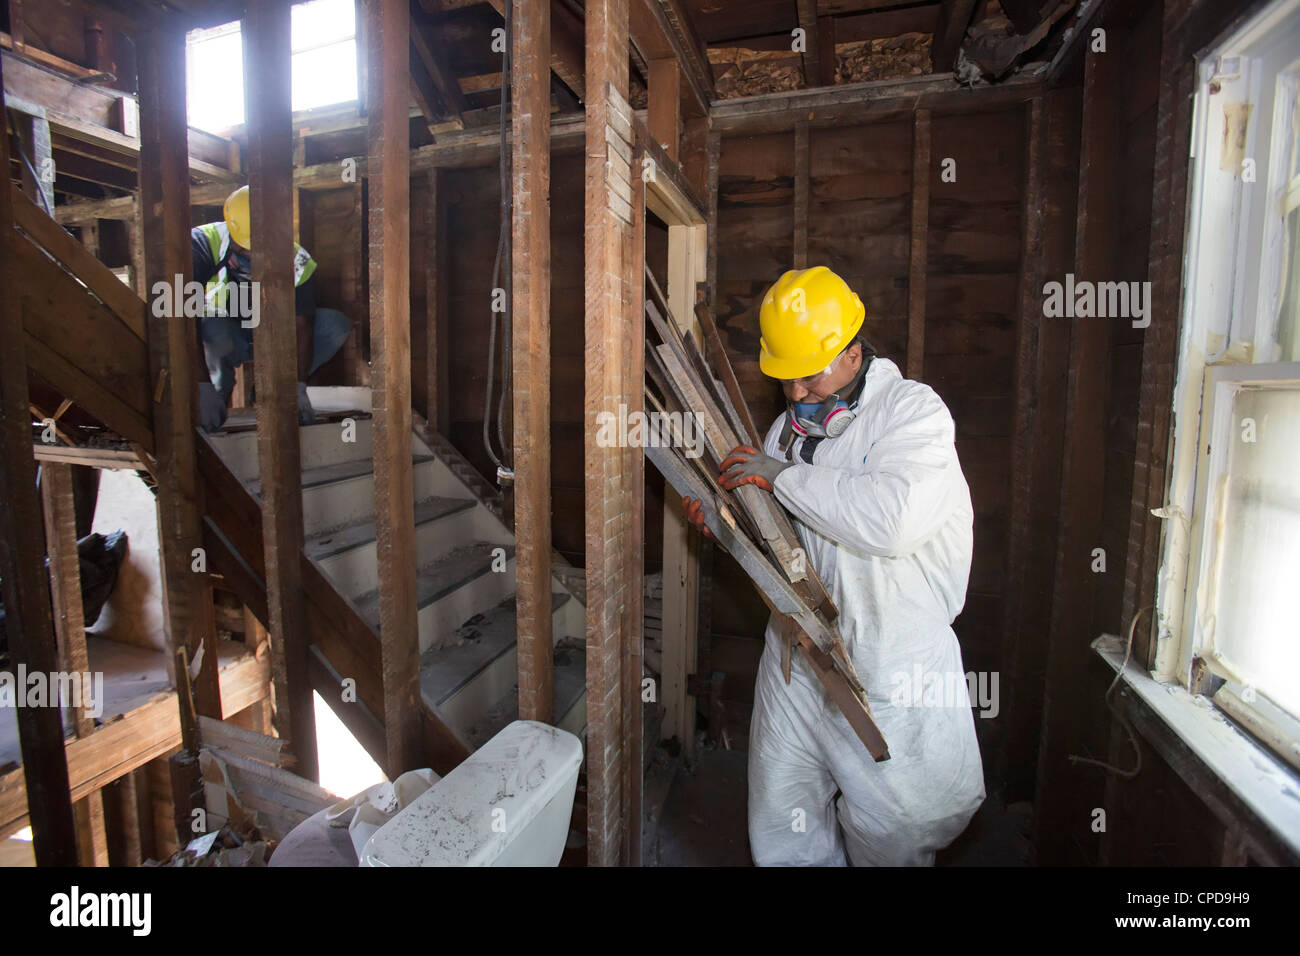 Workers salvage building materials from a home being 'deconstructed.' Stock Photo